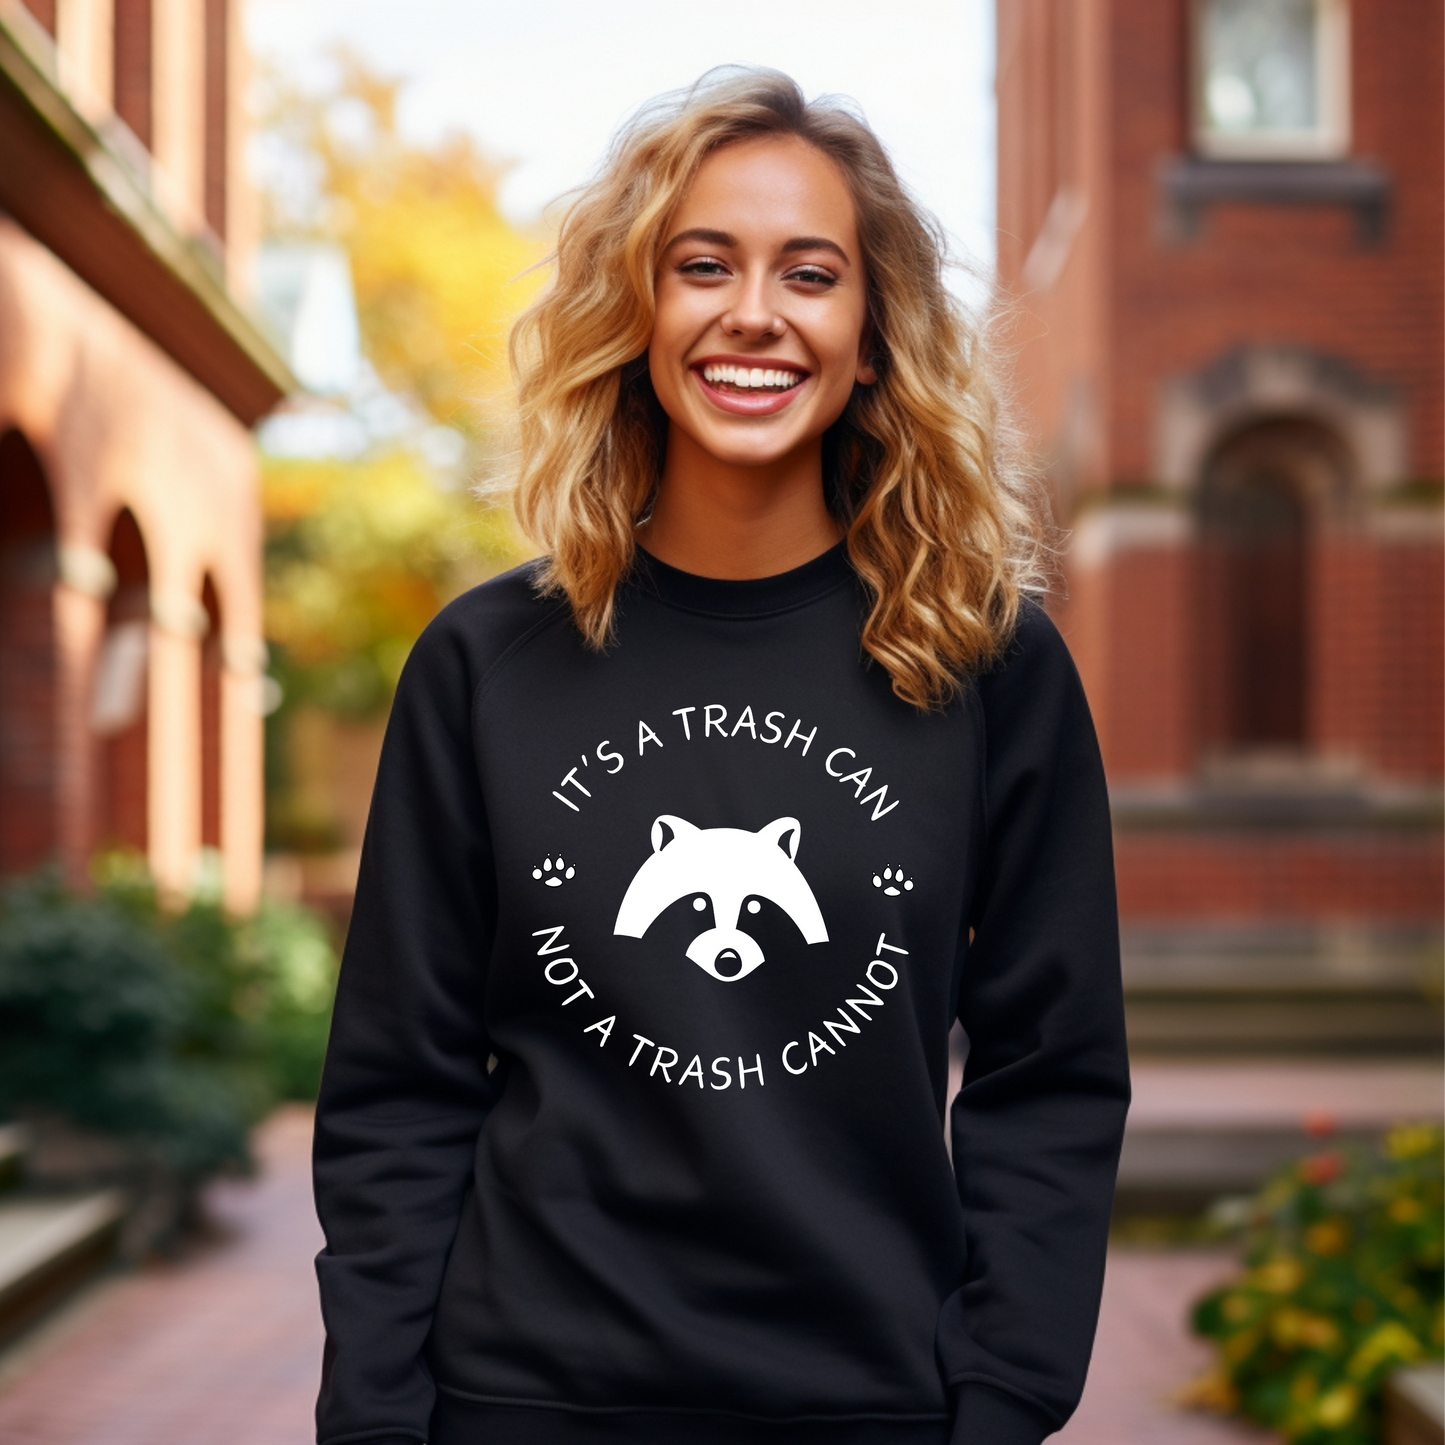 Cozy, Stylish, and Sarcastic Sweatshirt - It’s a Trash Can, Not a Trash Cannot